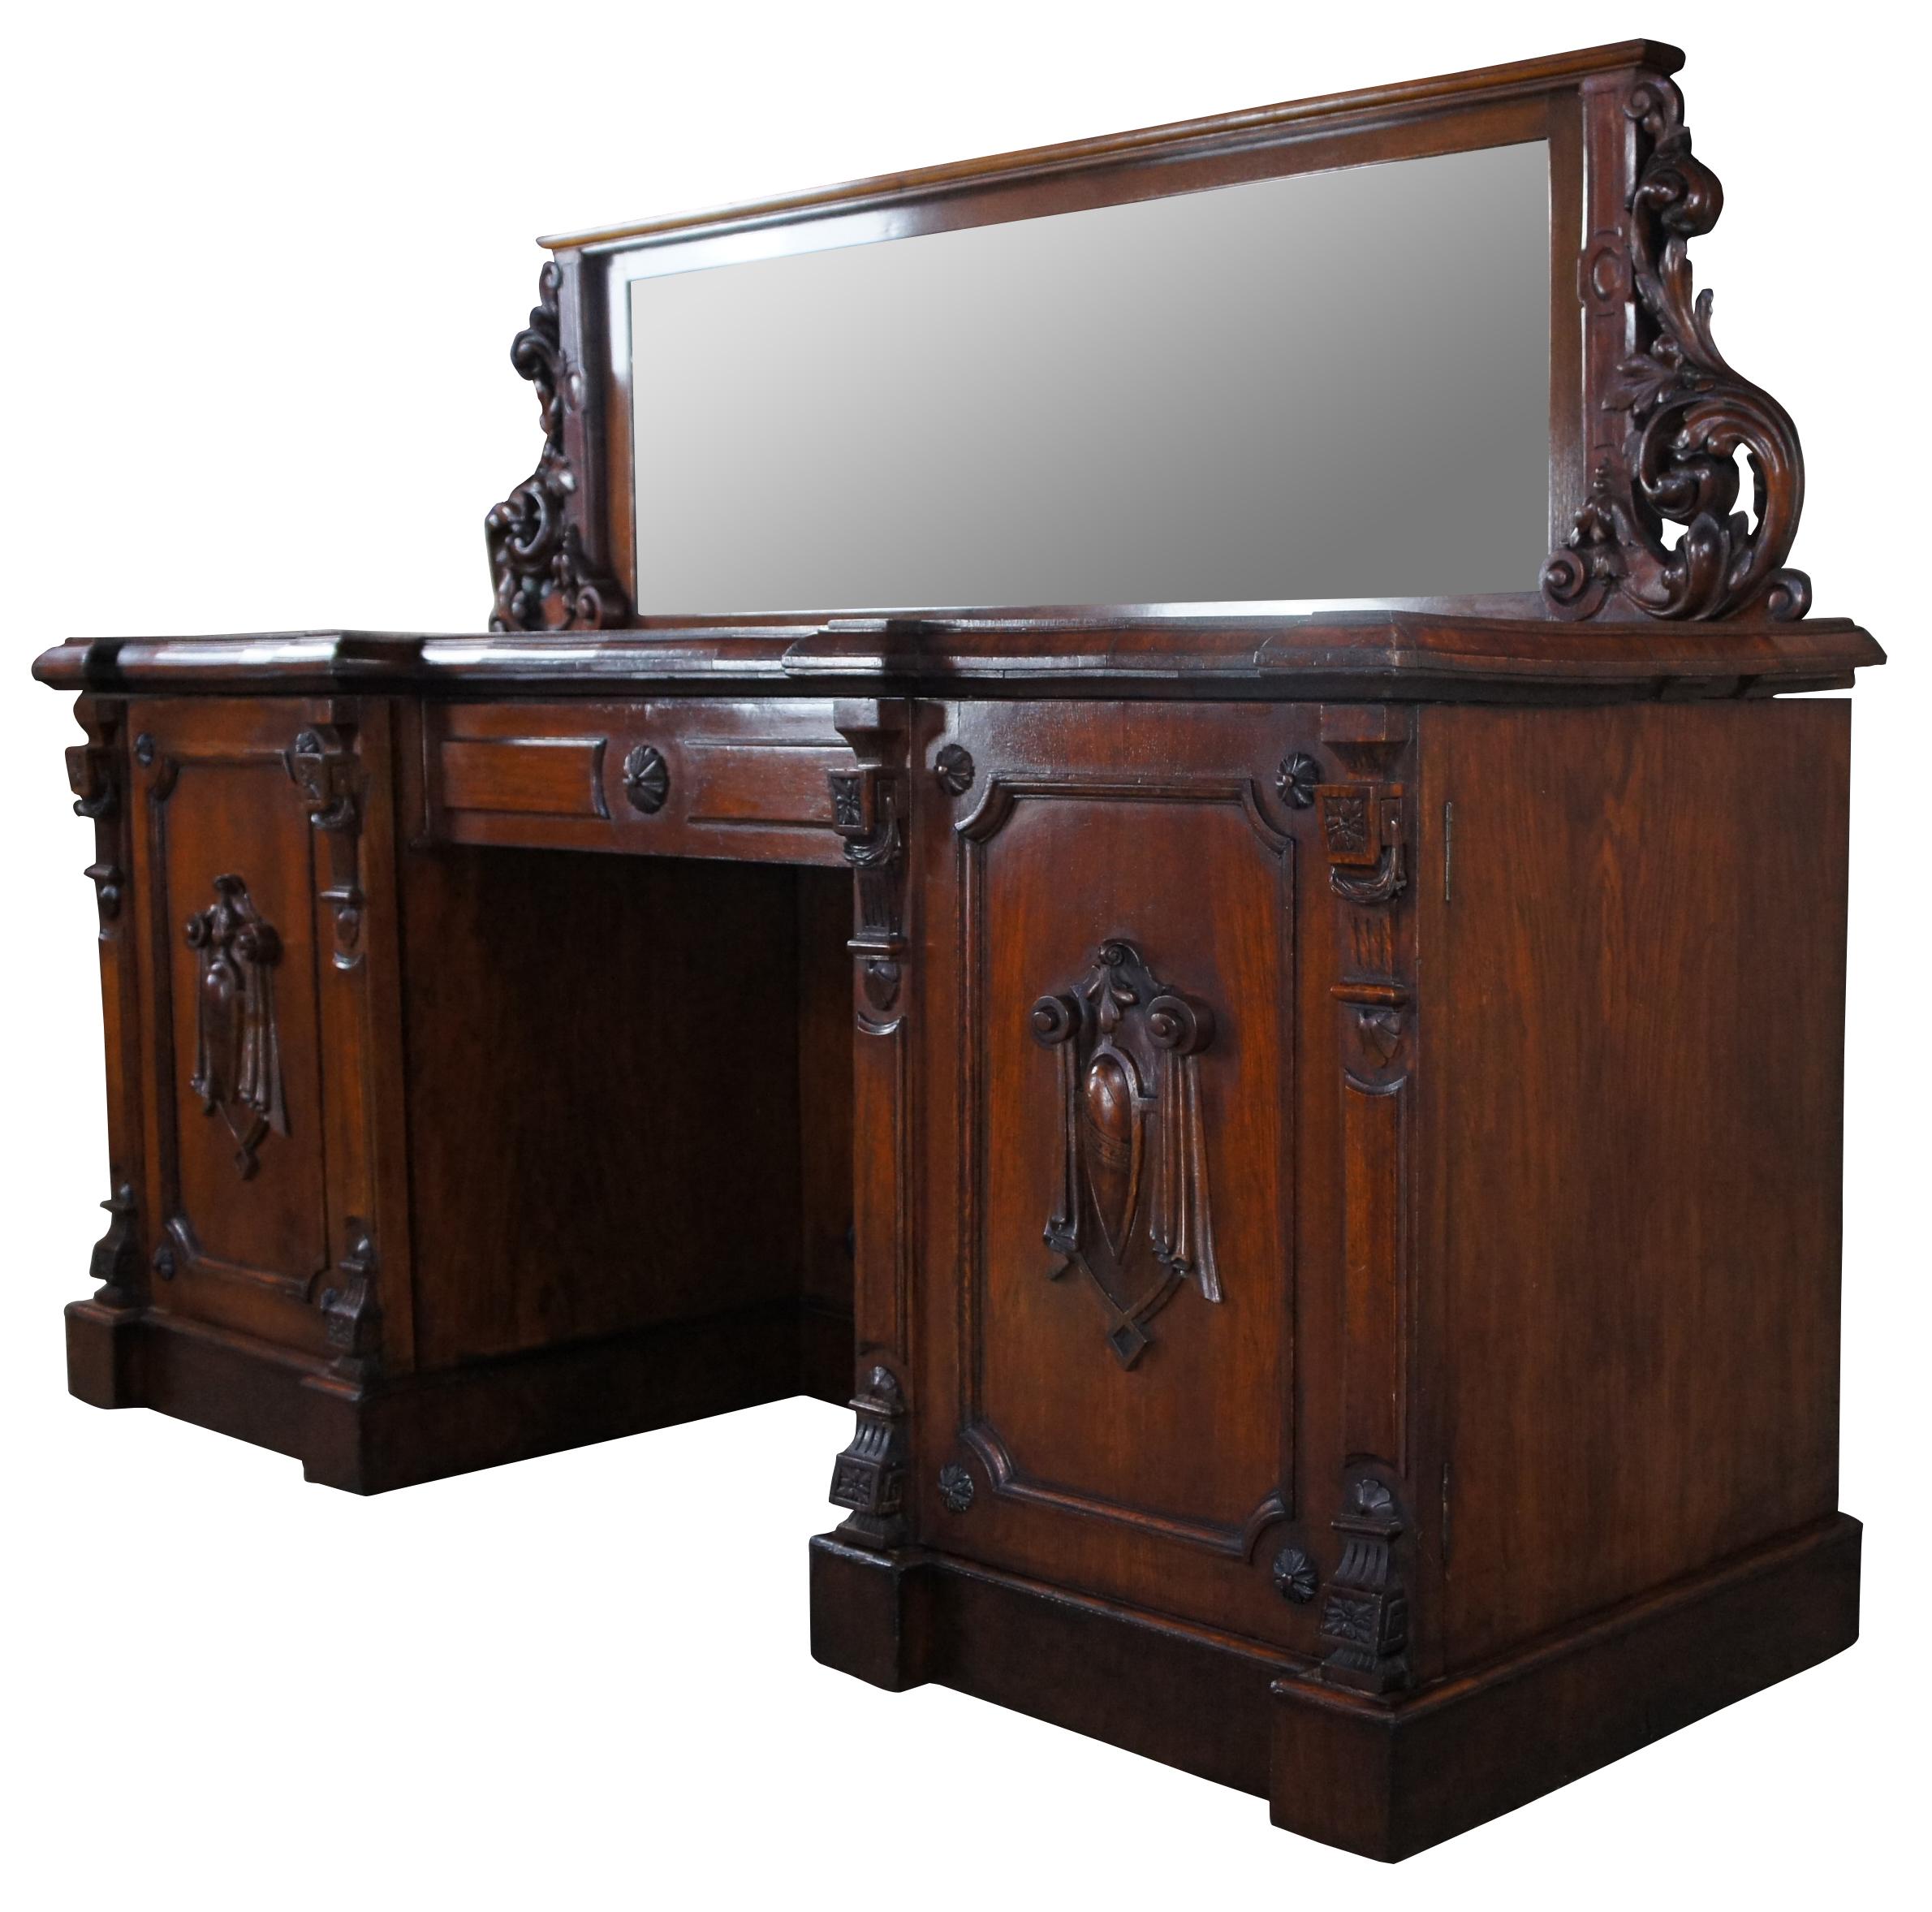 Monumental William IV twin pedestal sideboard, server or barback, circa first half 19th century. A rectangular breakfront form made from oak with ornately carved acanthus scrolling backsplash. Features a large central drawer flanked by outer